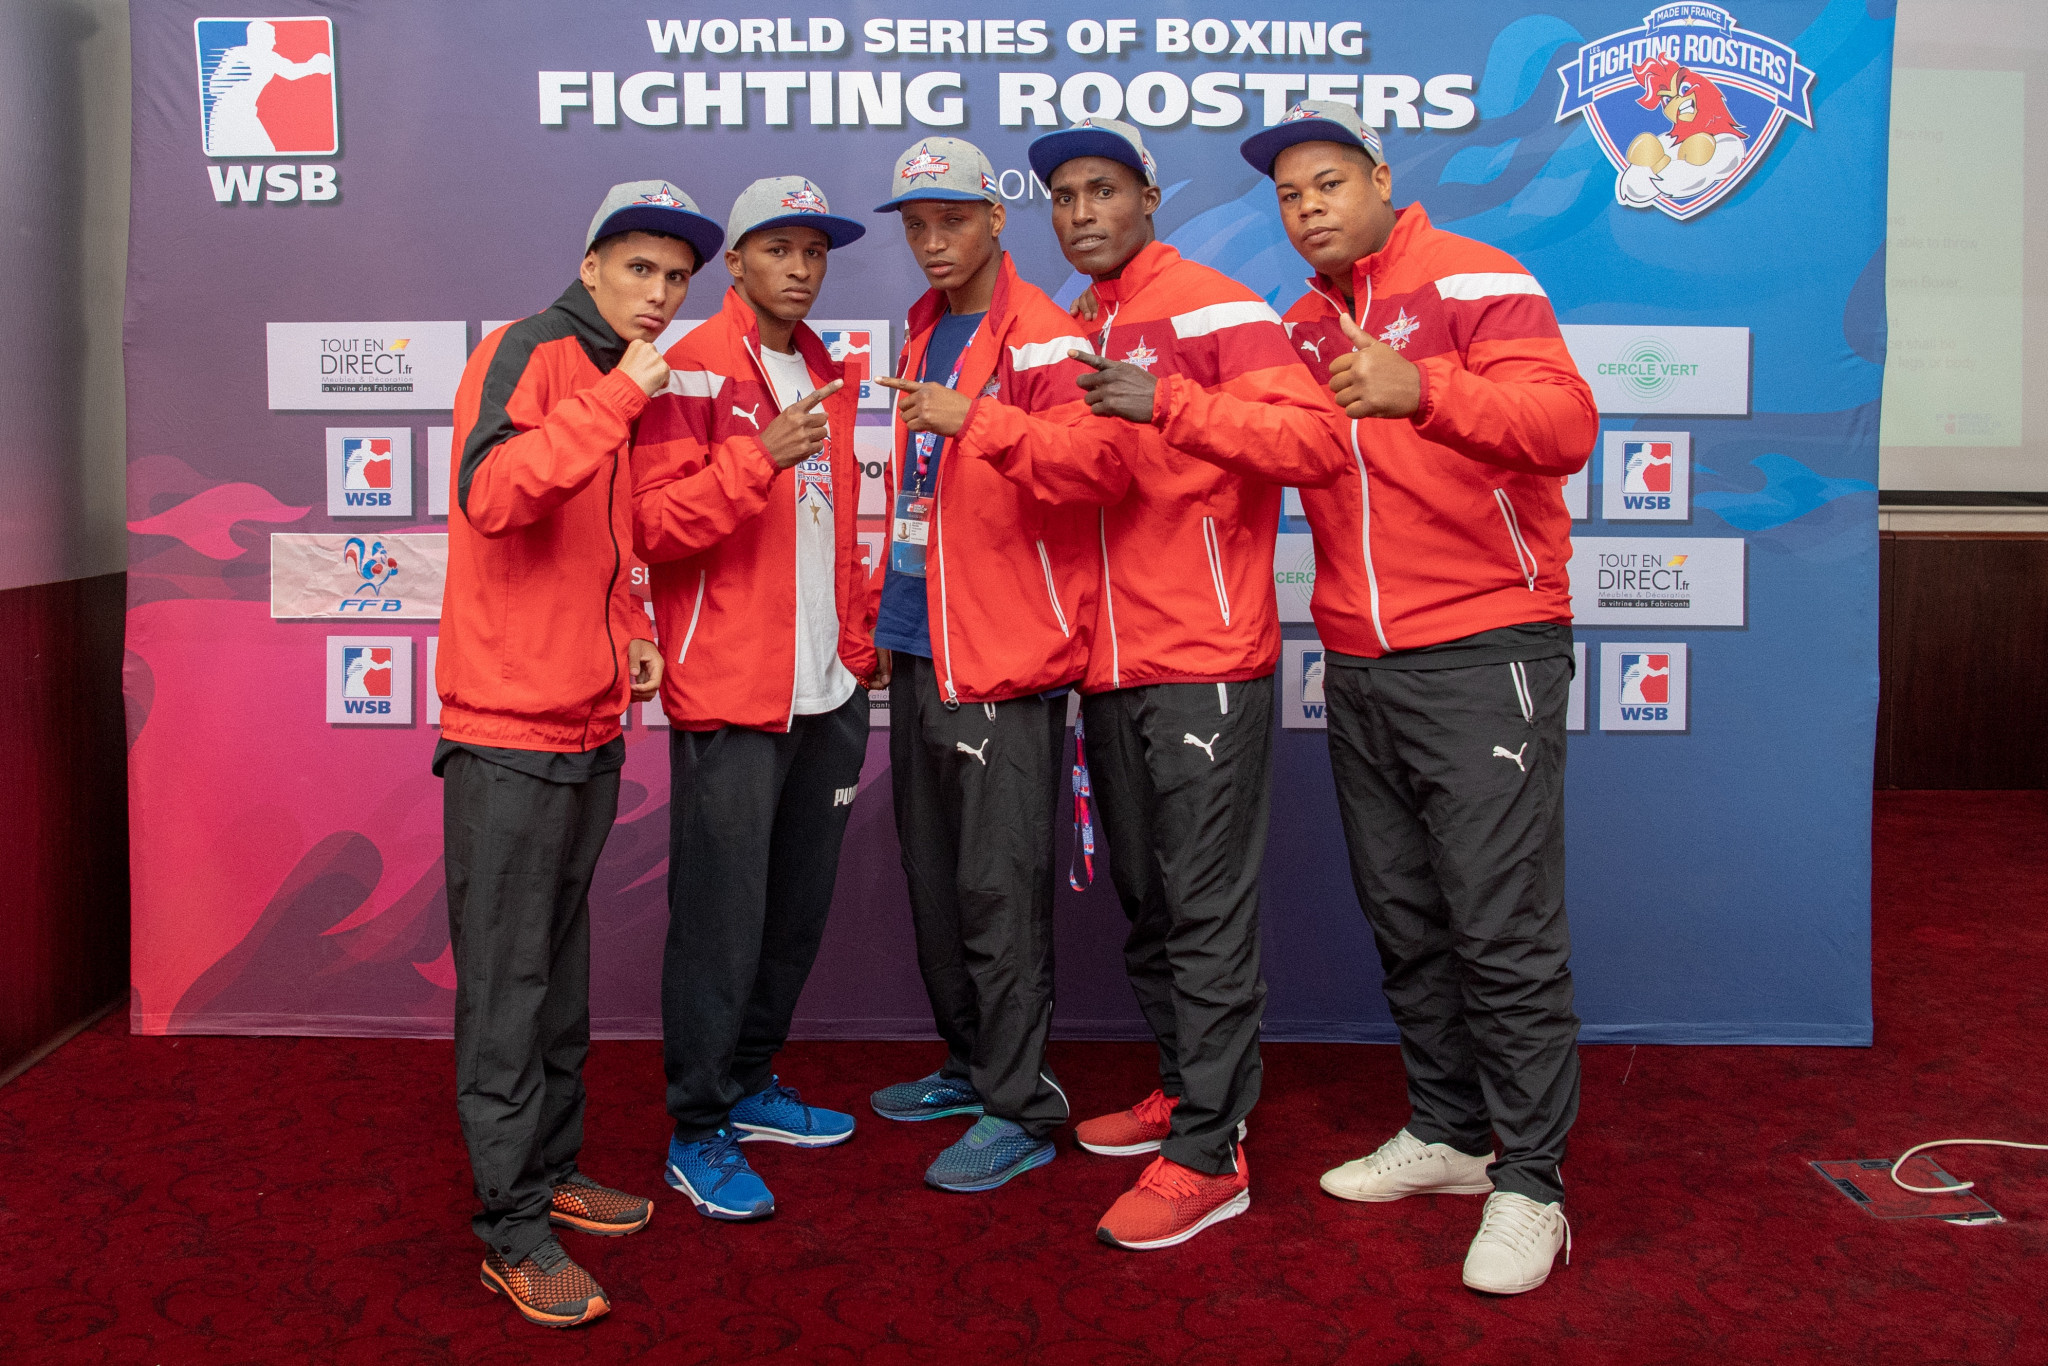 Cuba Domadores earn narrow first-leg lead in World Series of Boxing semi-final